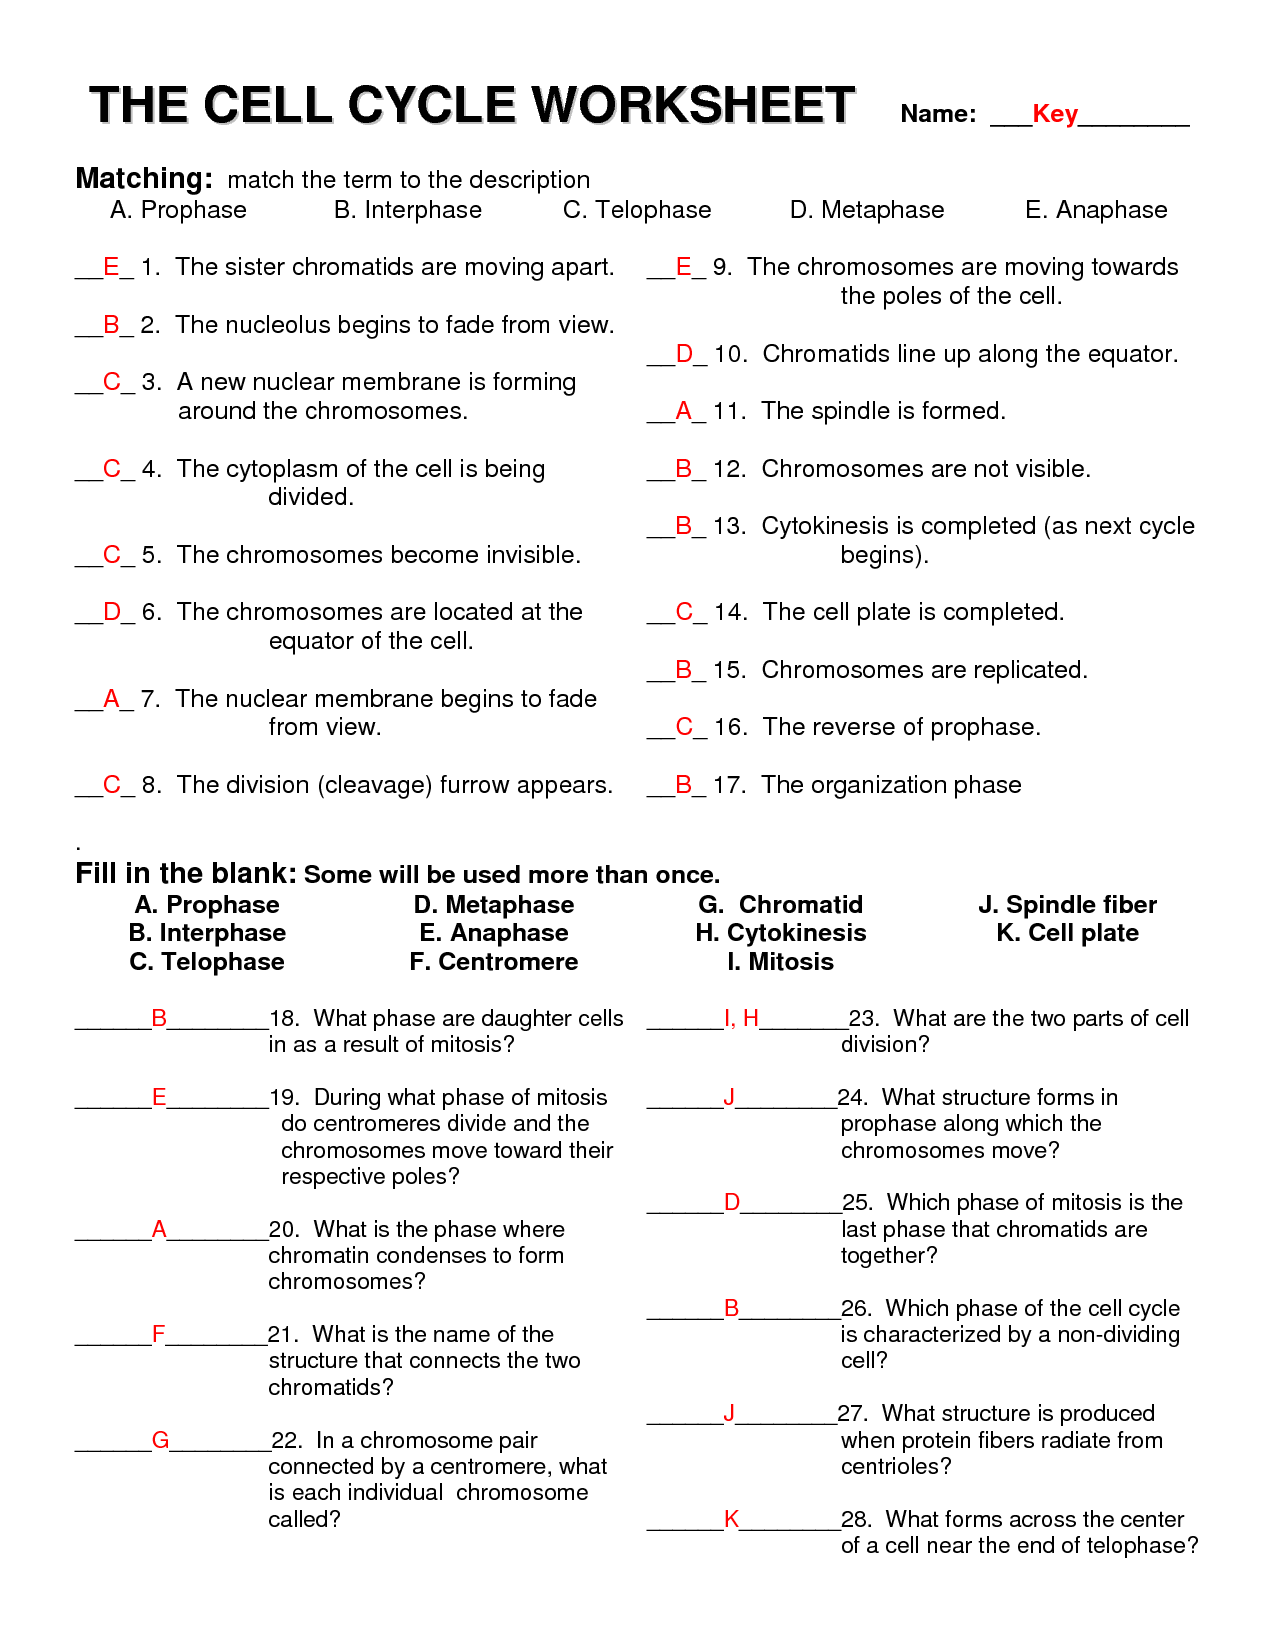 12-best-images-of-life-science-worksheet-answer-cell-cycle-worksheet-answer-key-meiosis-and